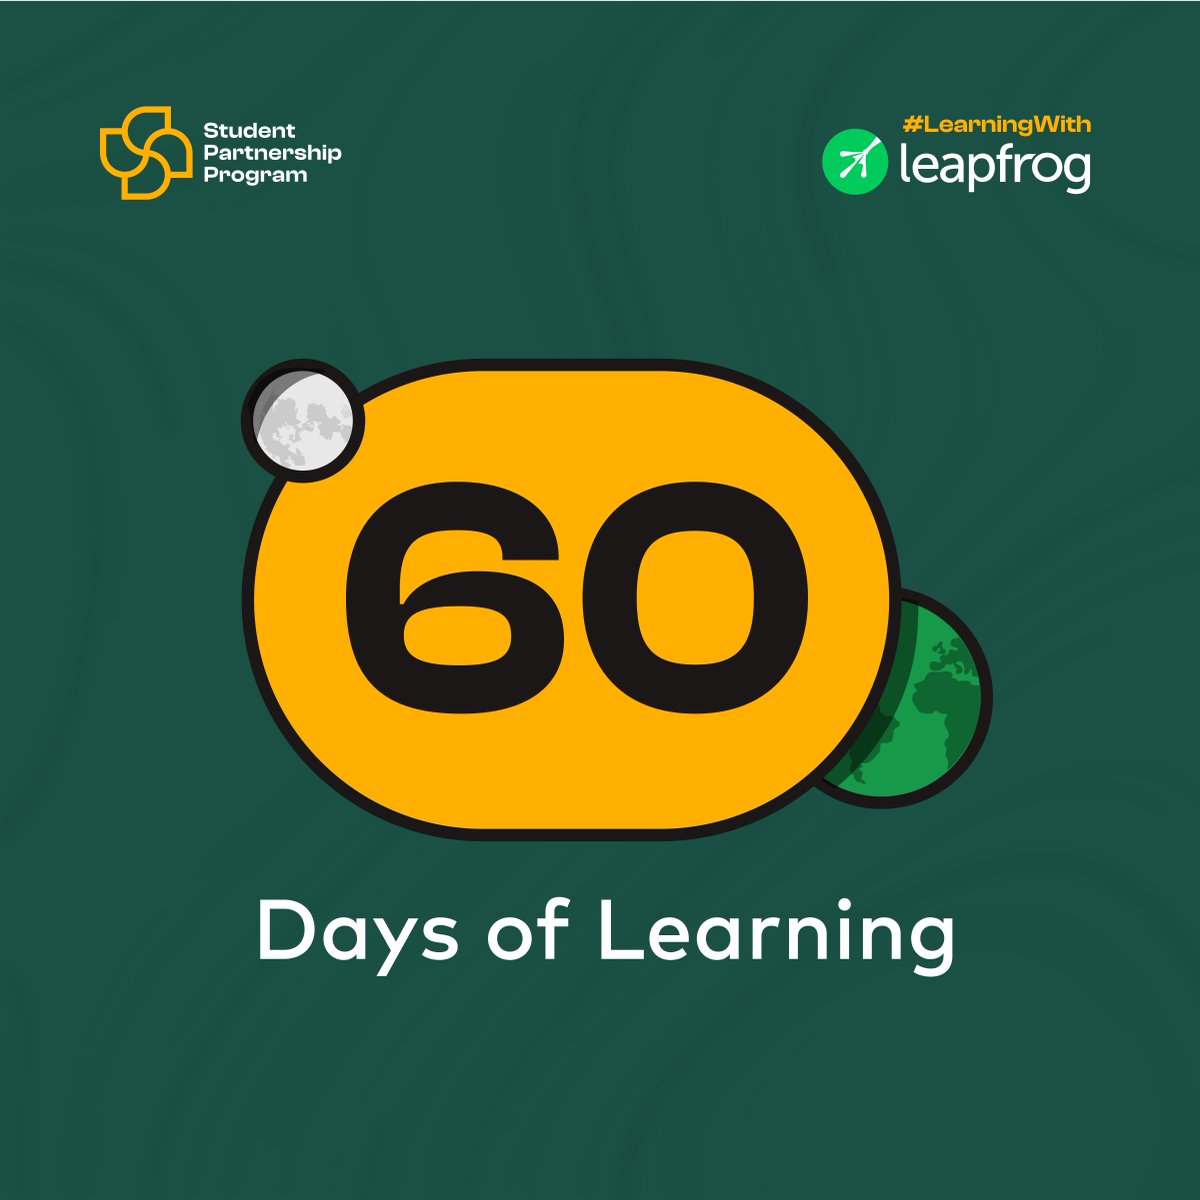 I'm publicly committing to the #60DaysOfLearningWithLeapfrog challenge starting from june1.#HappyLearning